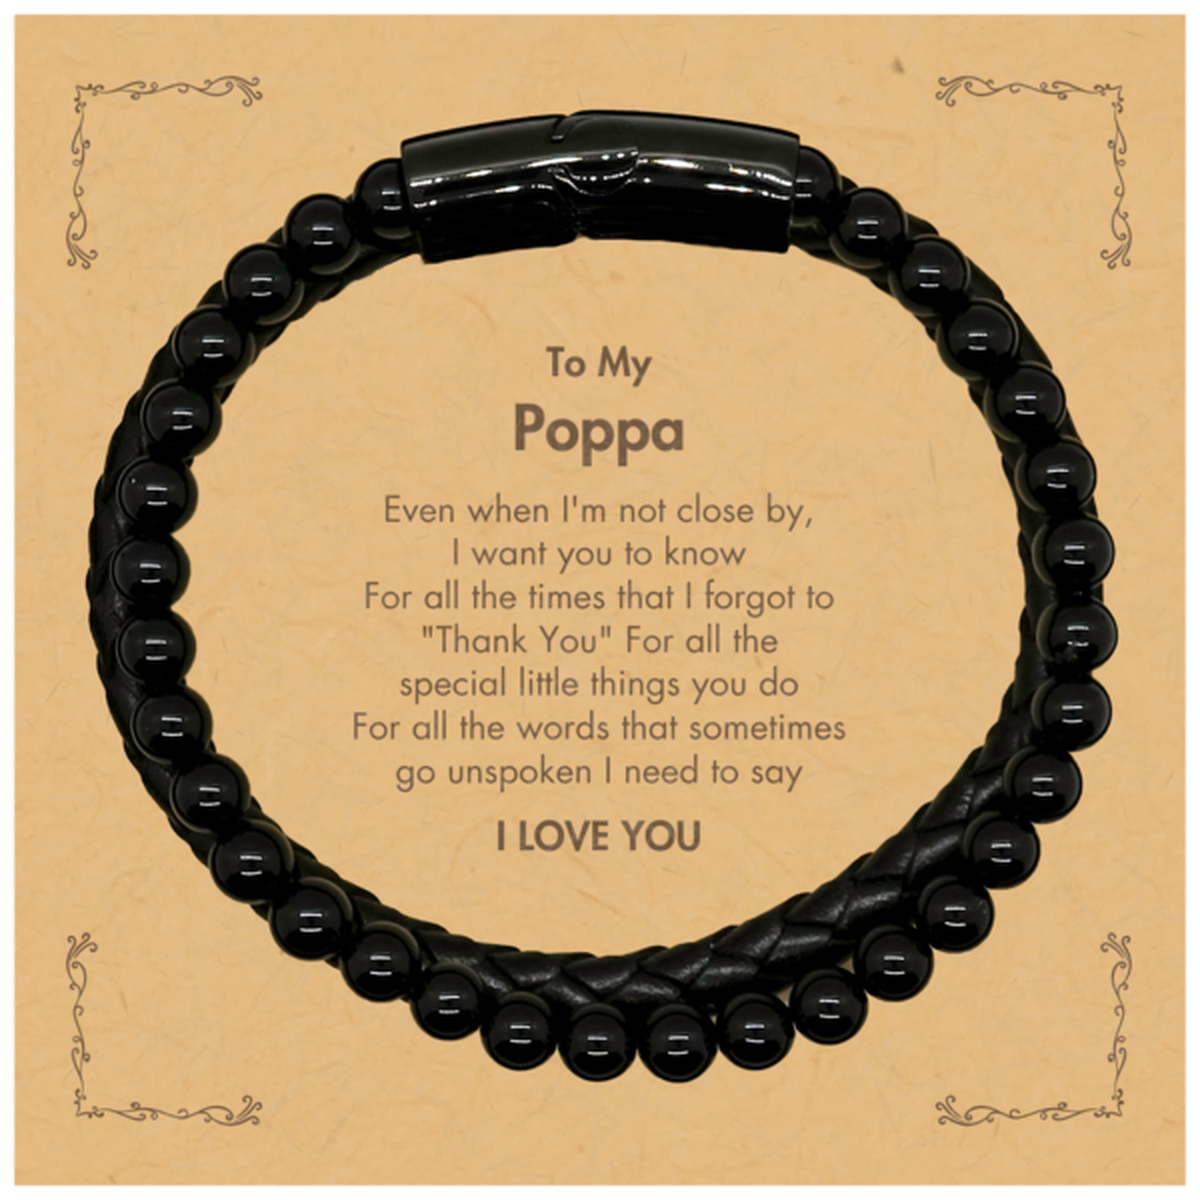 Thank You Gifts for Poppa, Keepsake Stone Leather Bracelets Gifts for Poppa Birthday Mother's day Father's Day Poppa For all the words That sometimes go unspoken I need to say I LOVE YOU